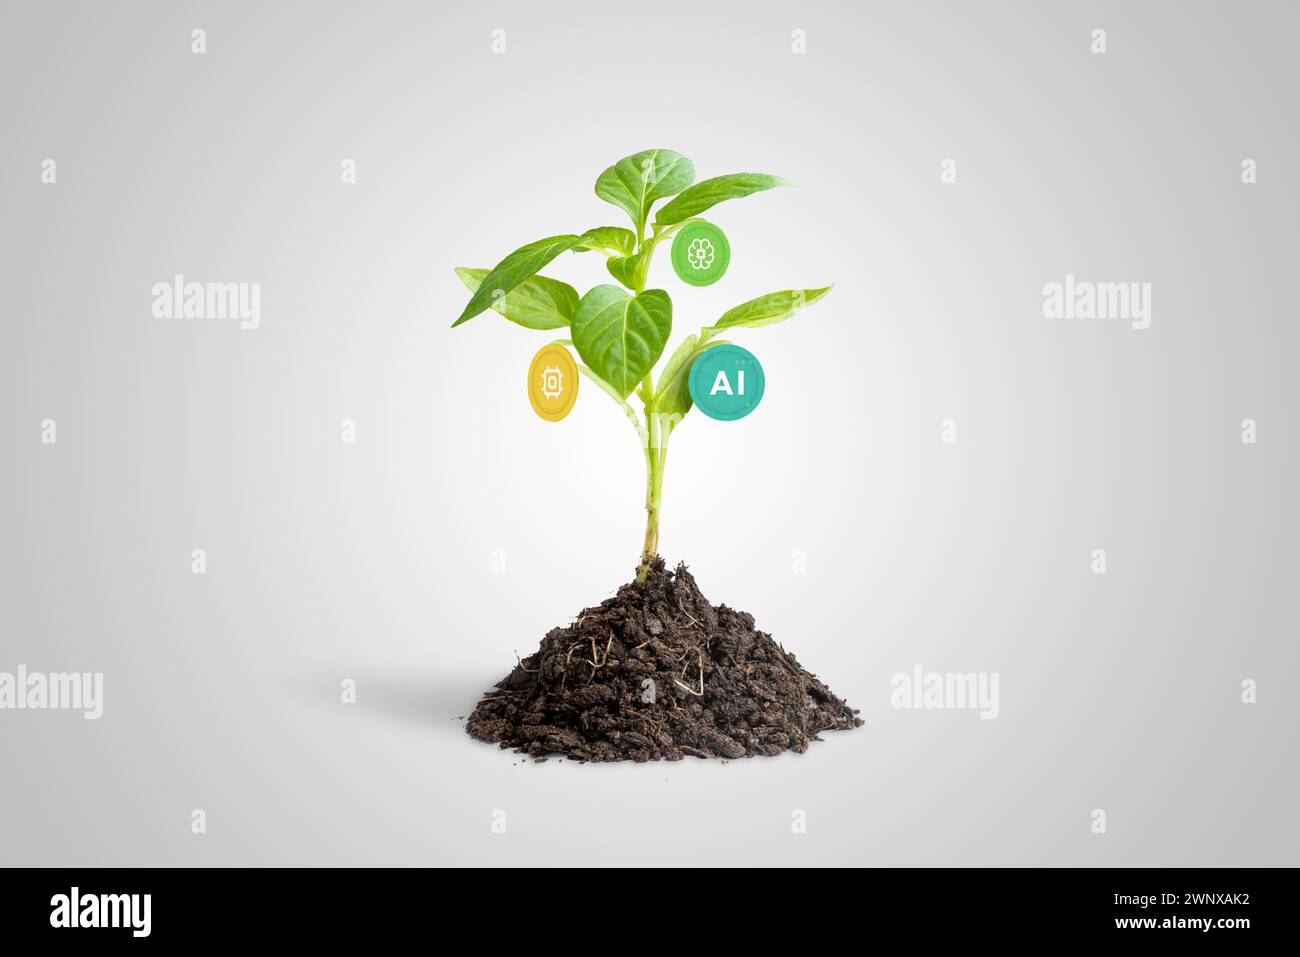 Growing AI industry. Plant with AI icons as fruits, symbolizing the evolution of ai with machine learning advancements Stock Photo